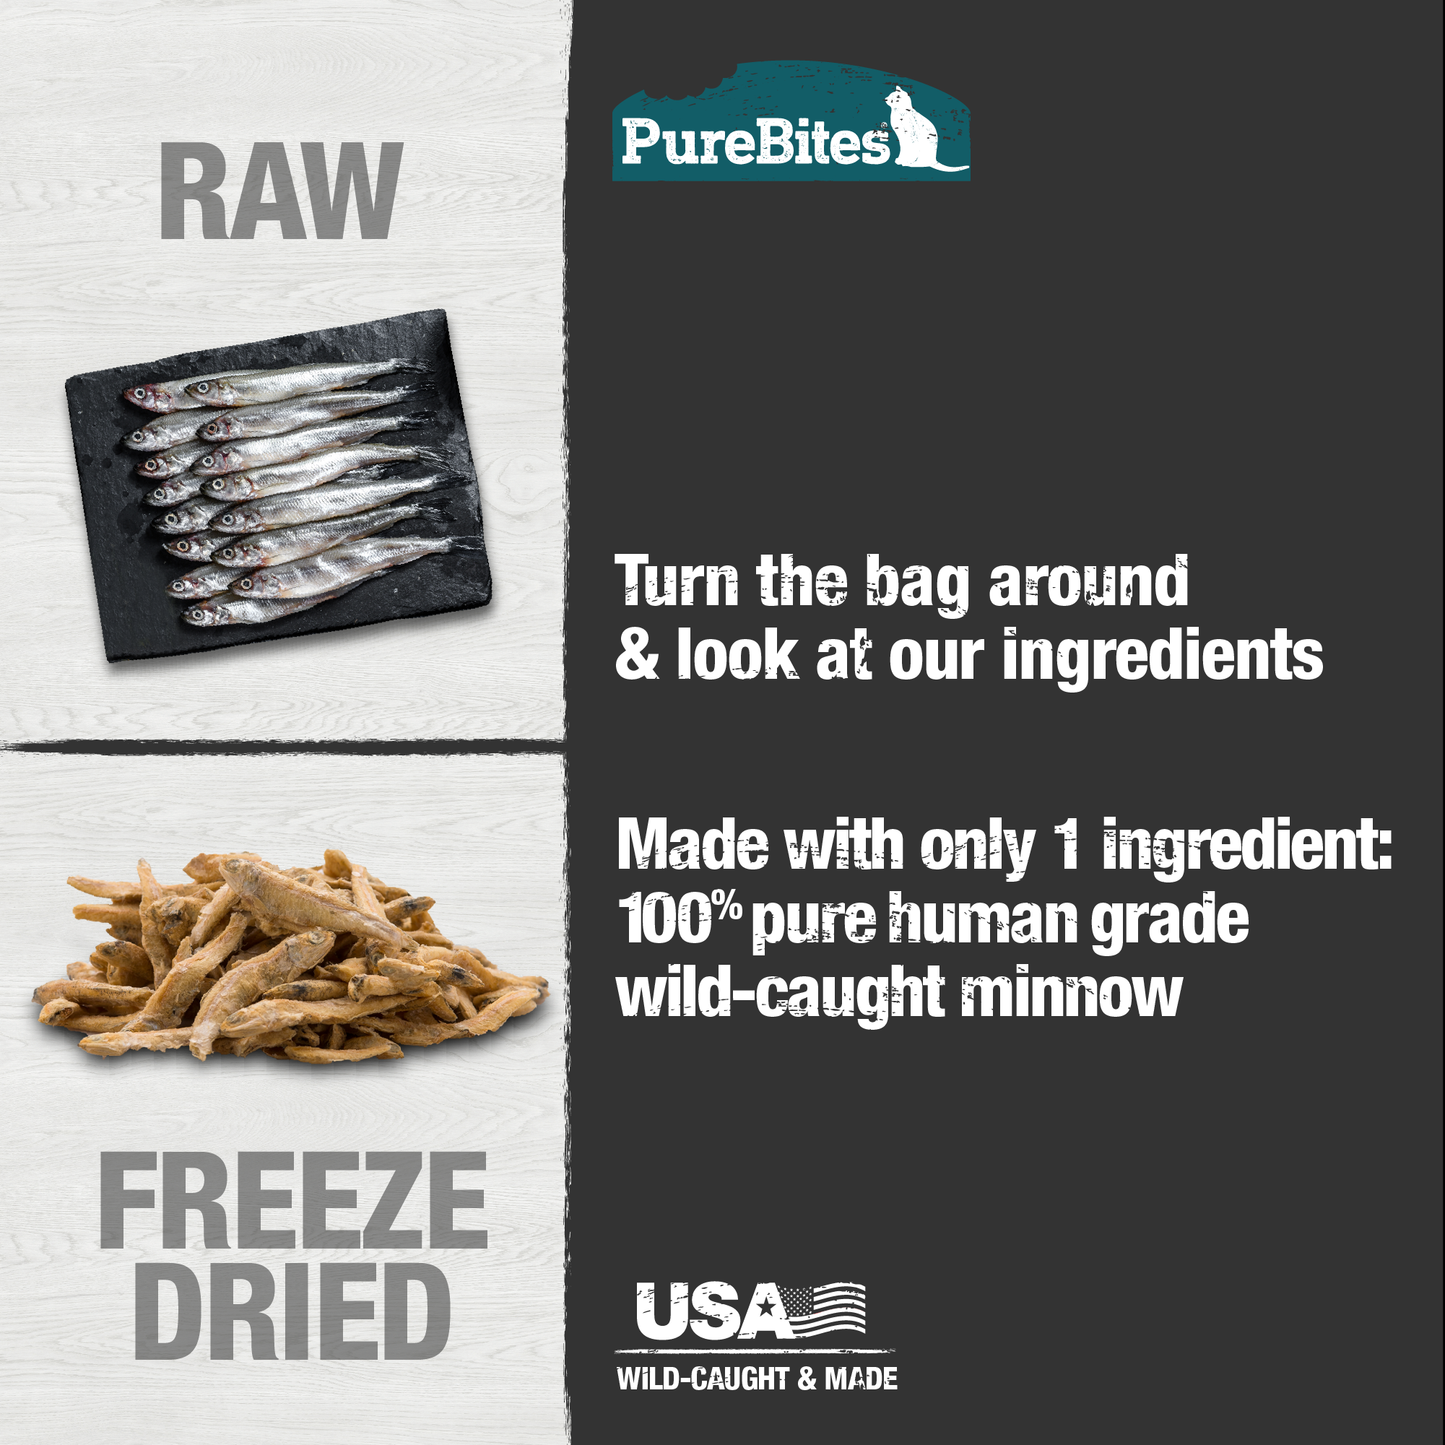 Made with only 1 Ingredient you can read, pronounce, and trust: USA sourced wild-caught human grade minnow.